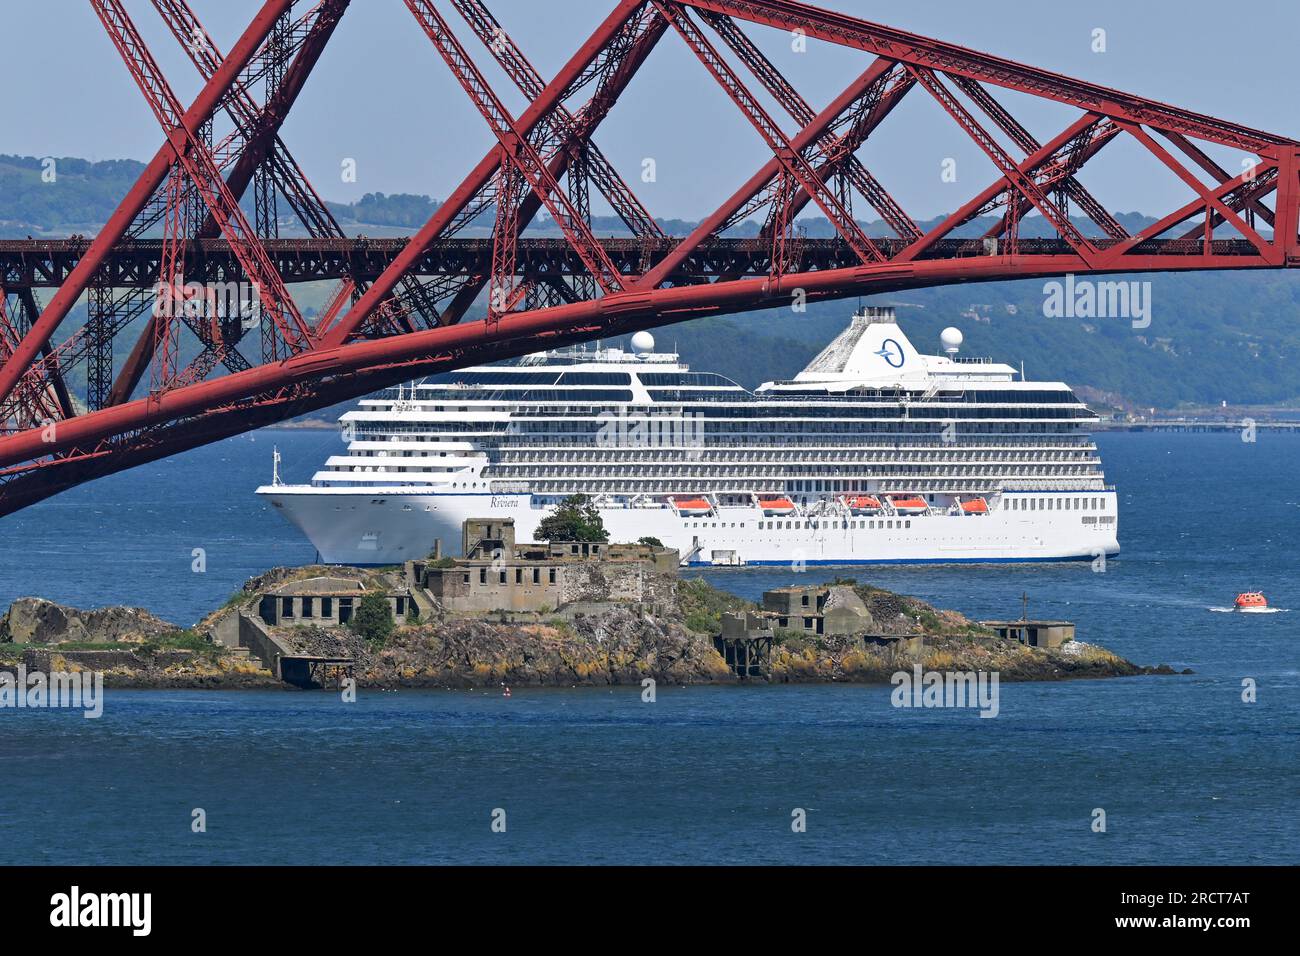 Cruise Ship MS Riviera Anchored In The Firth Of Forth Near To The Forth Rail Bridge & Inchgarvie Island. Stock Photo